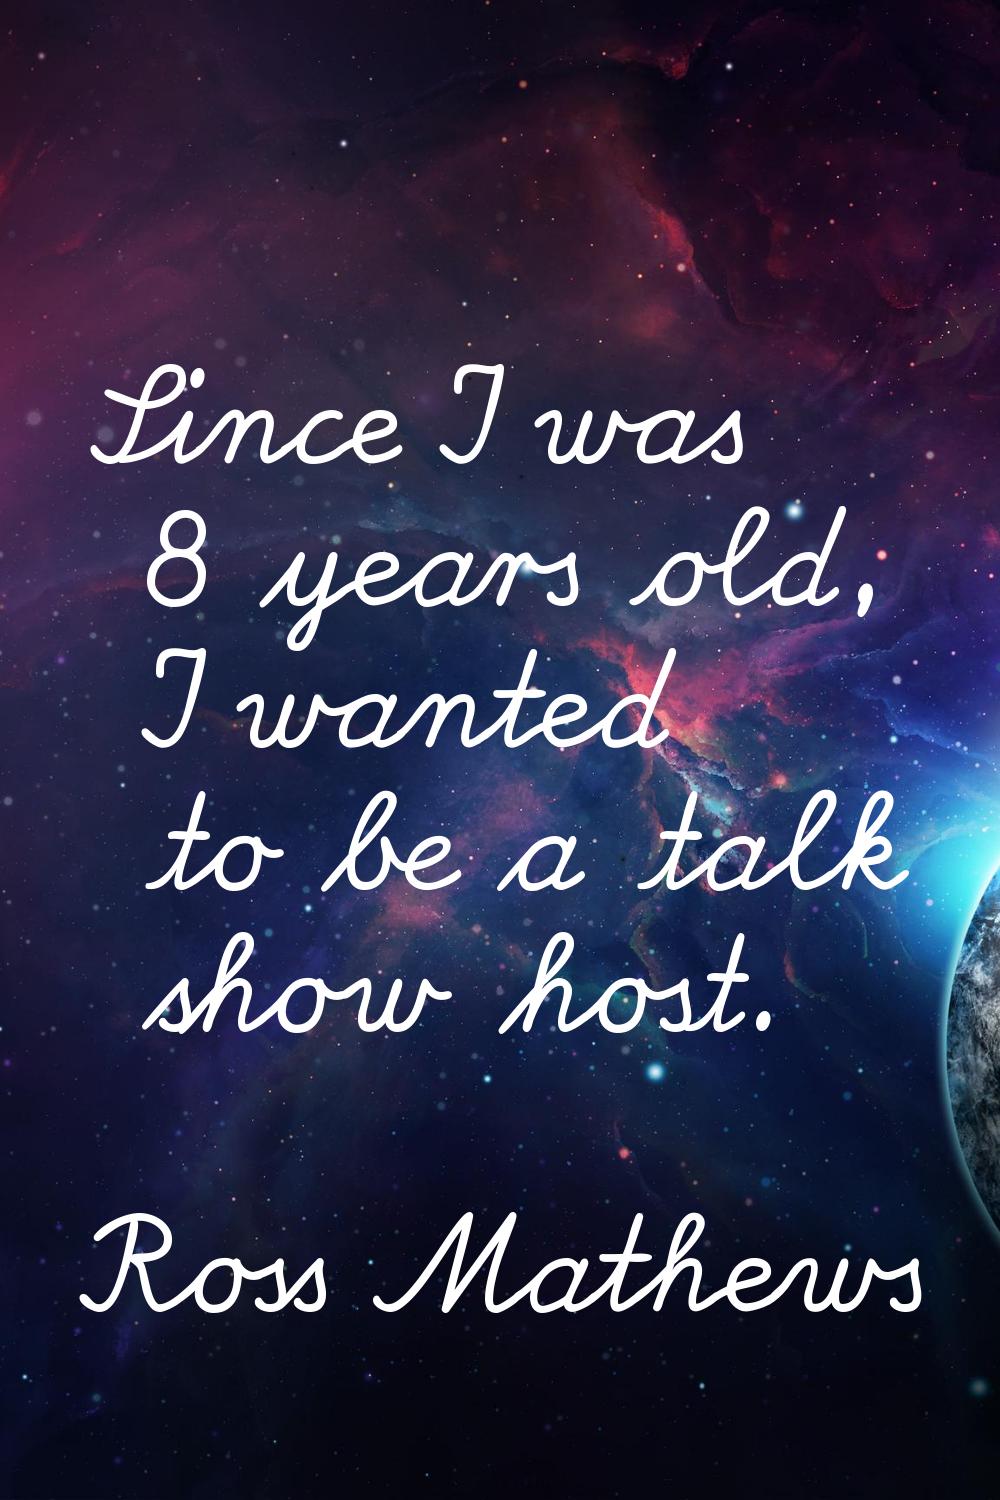 Since I was 8 years old, I wanted to be a talk show host.